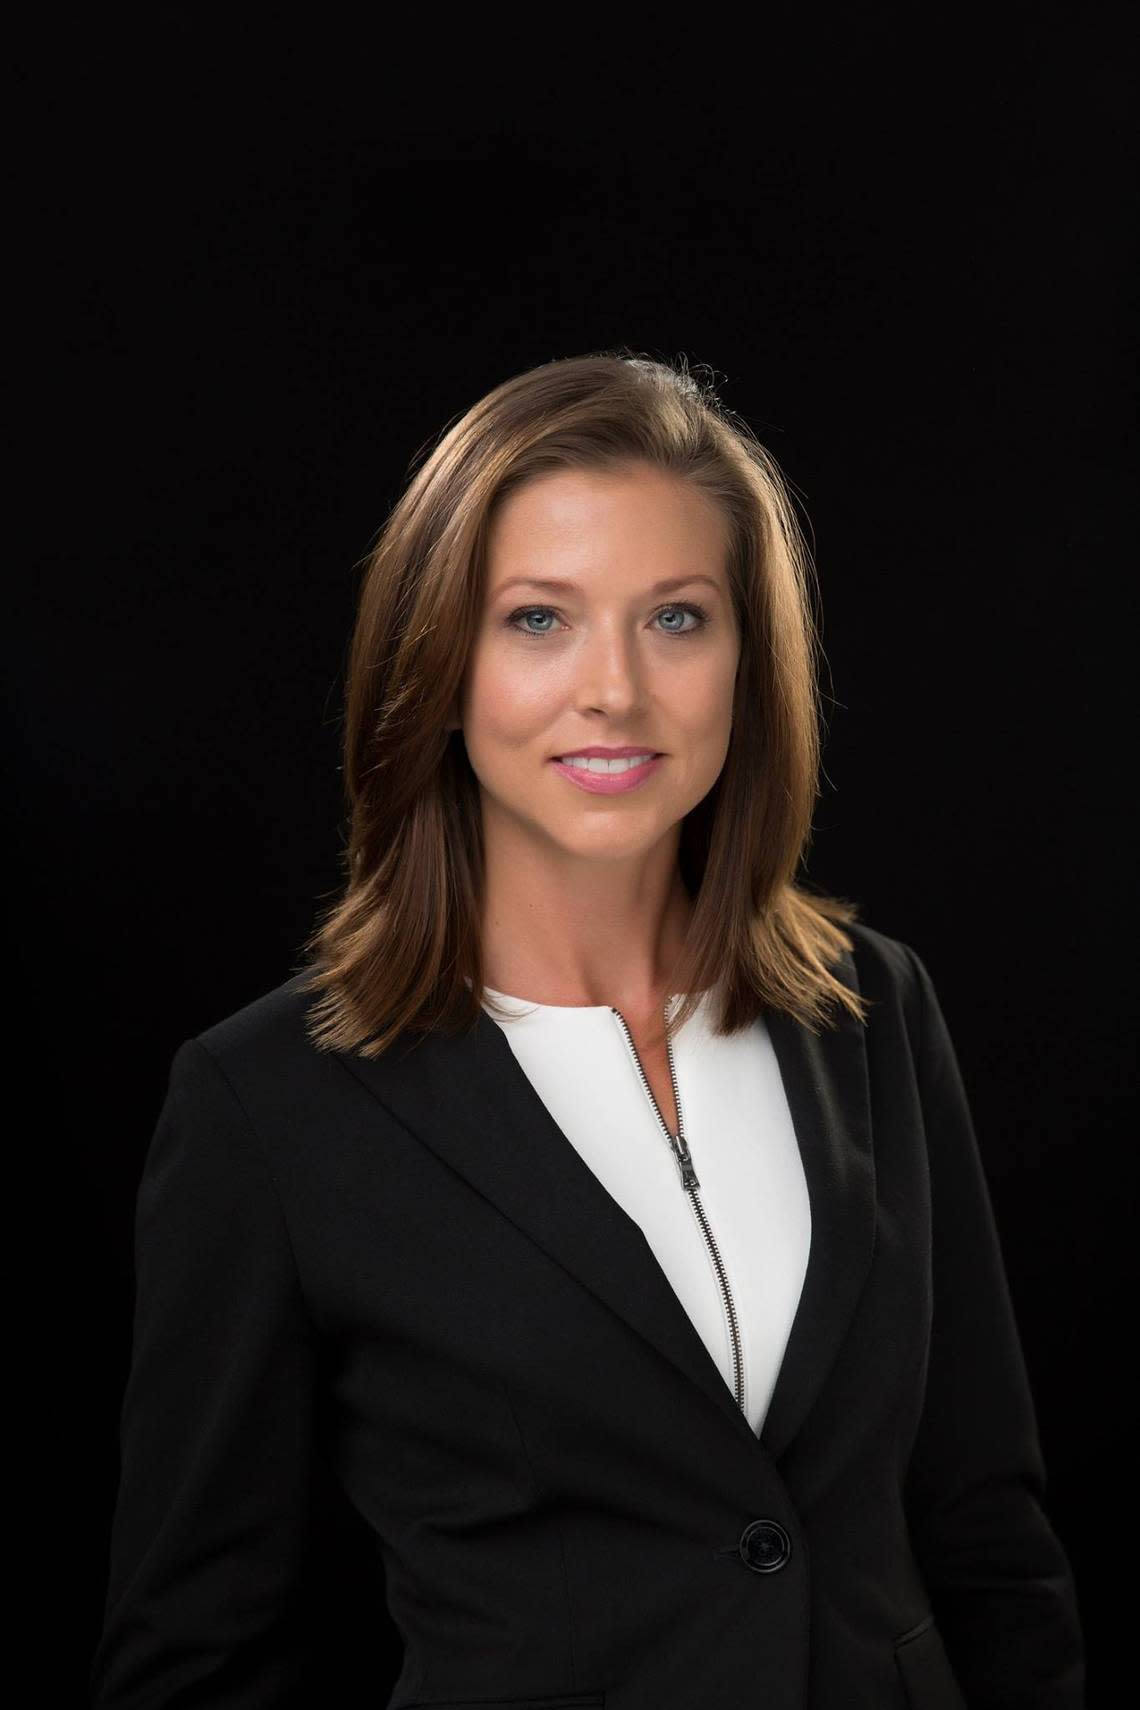 Kelli Kearney is an assistant commonwealth attorney in the 14th Judicial Circuit. She is running in the May Primary against incumbent Sharon Muse Johnson.